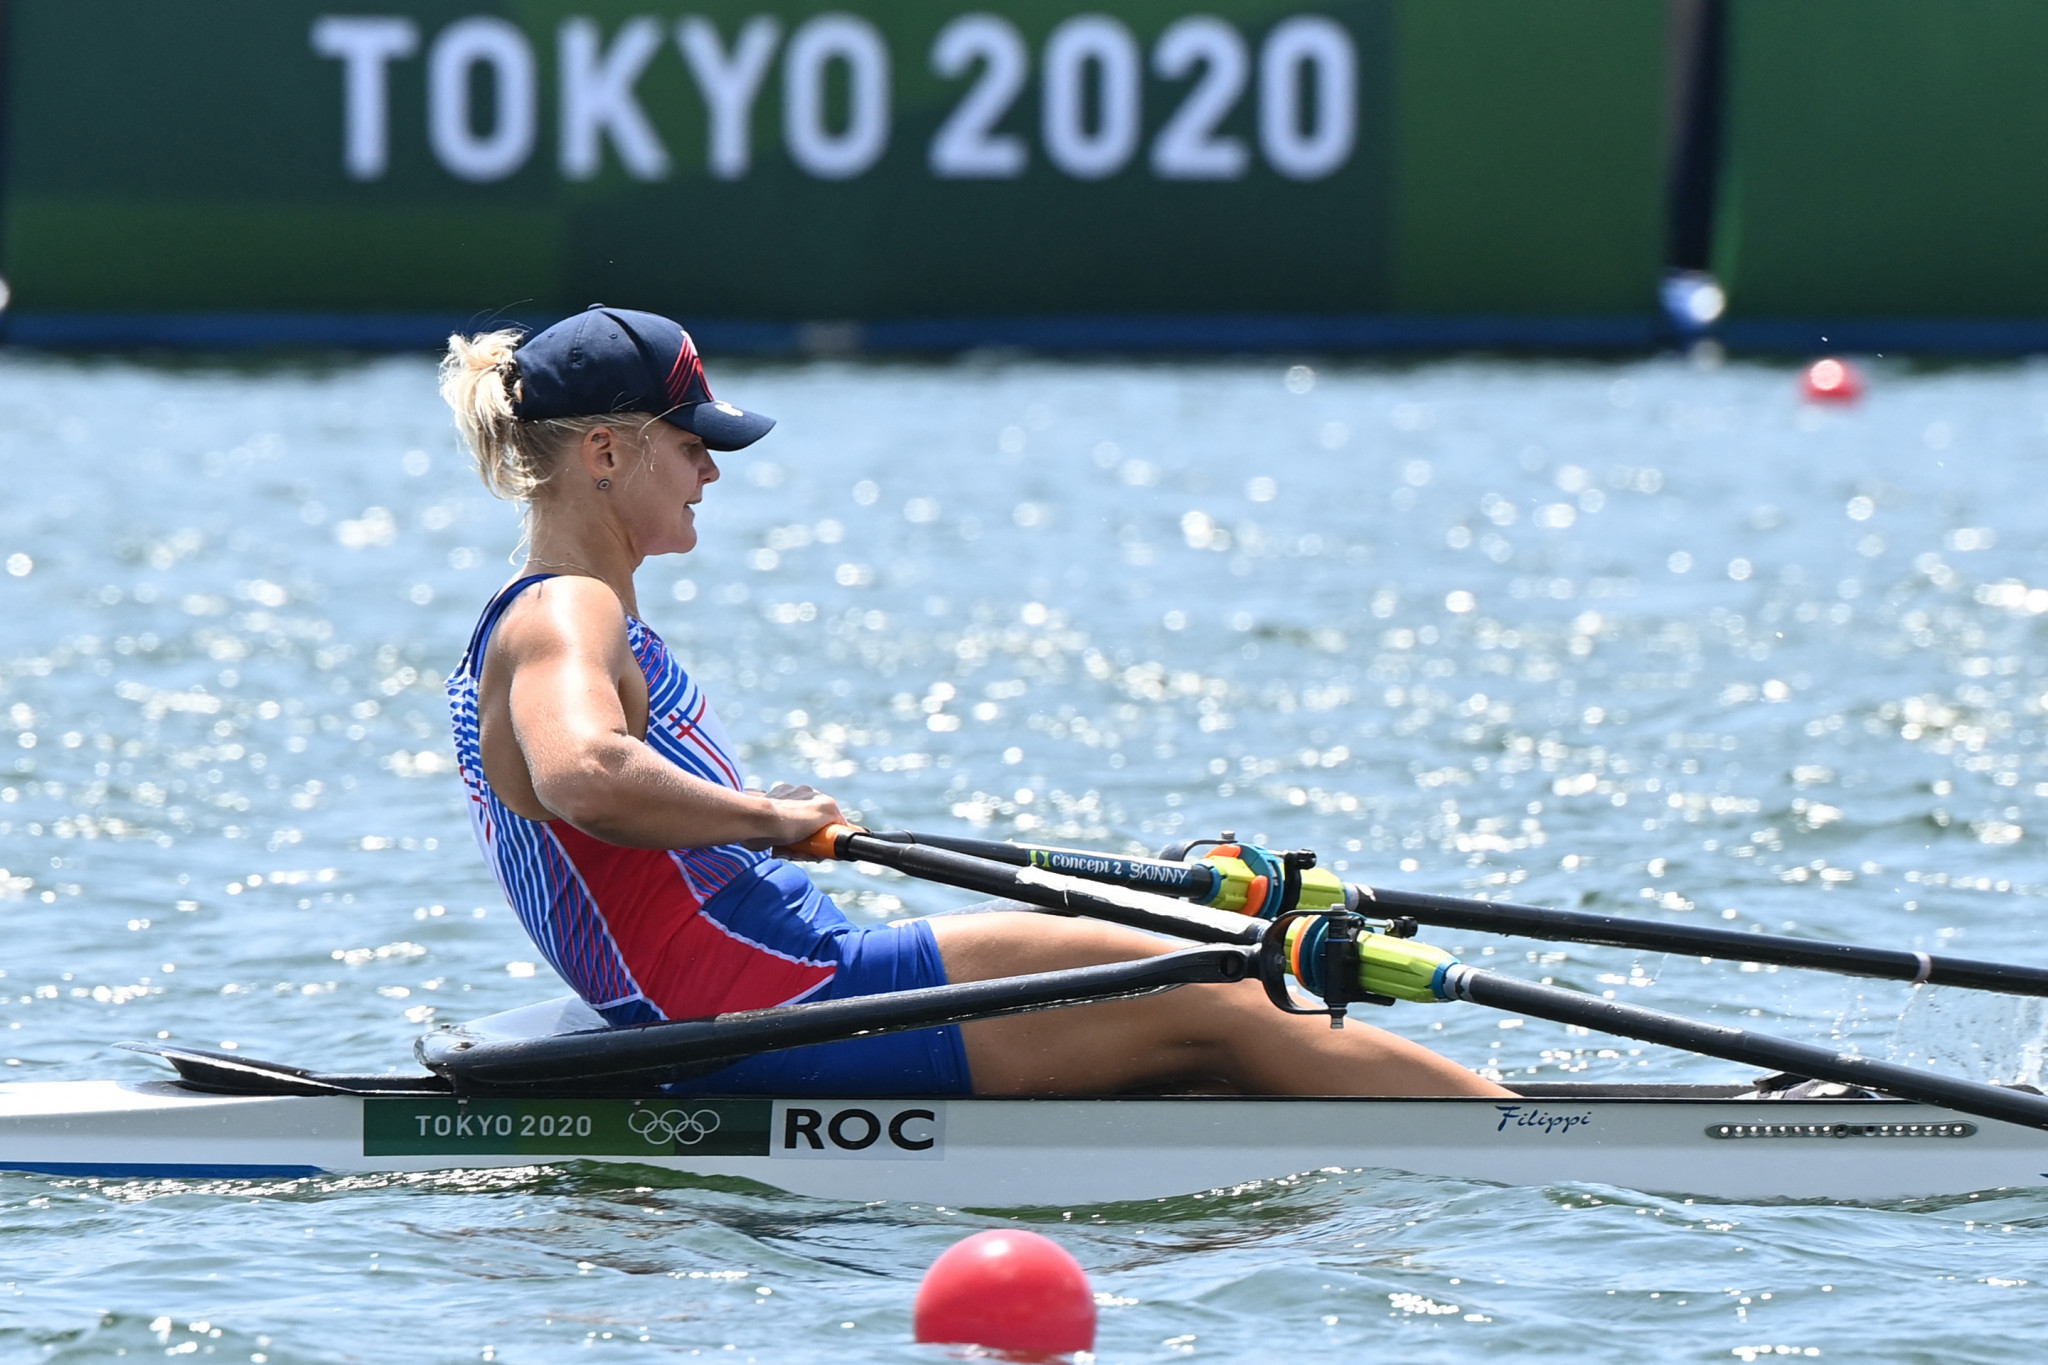 World Rowing to allow "limited number" of Russians to compete as neutrals